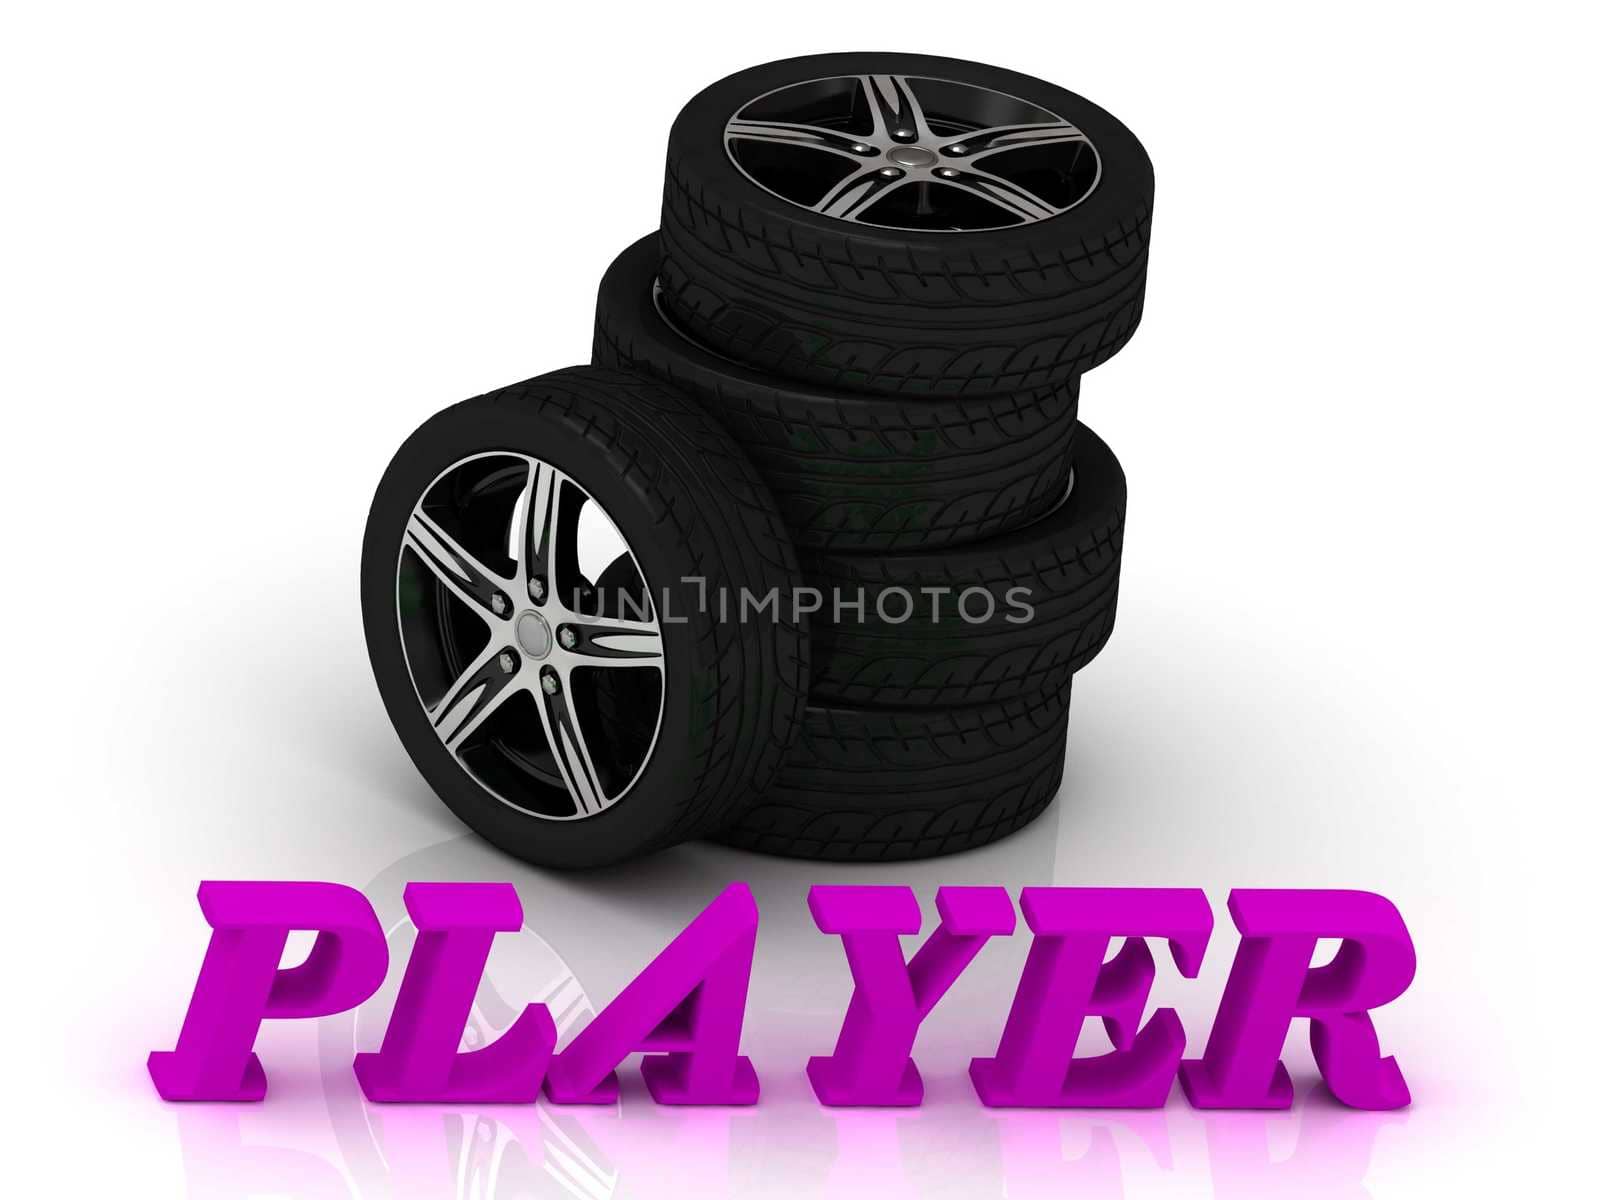 PLAYER- bright letters and rims mashine black wheels on a white background